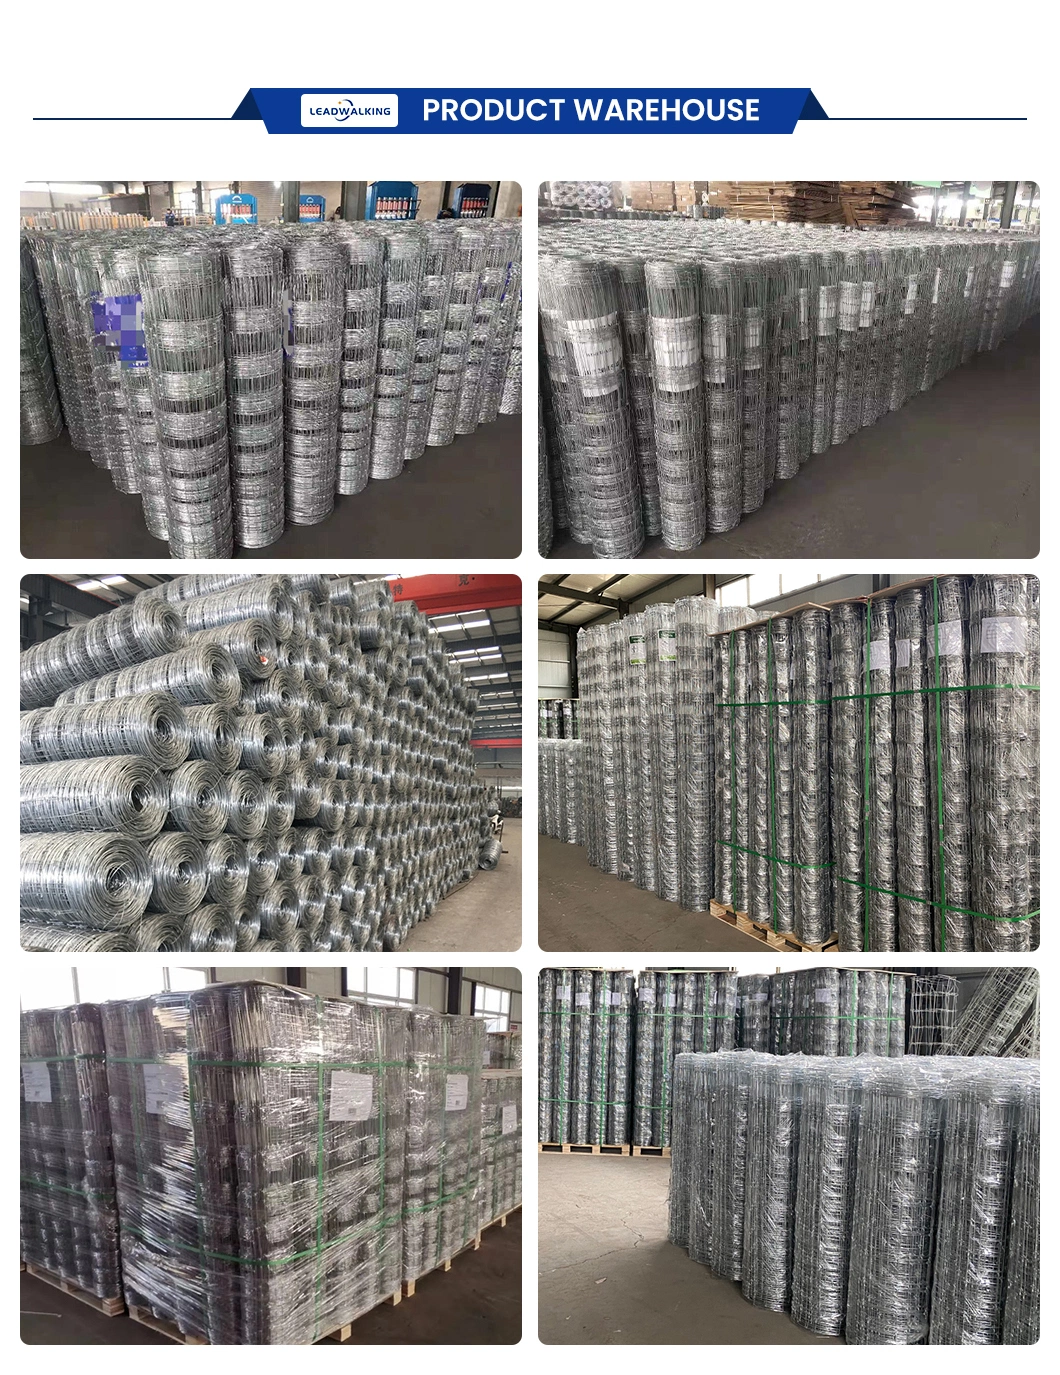 Leadwalking Cheap Field Fences High-Quality Light Duty Field Fence Manufacturing China Rugged and Precise Galvanized Cattle Fence